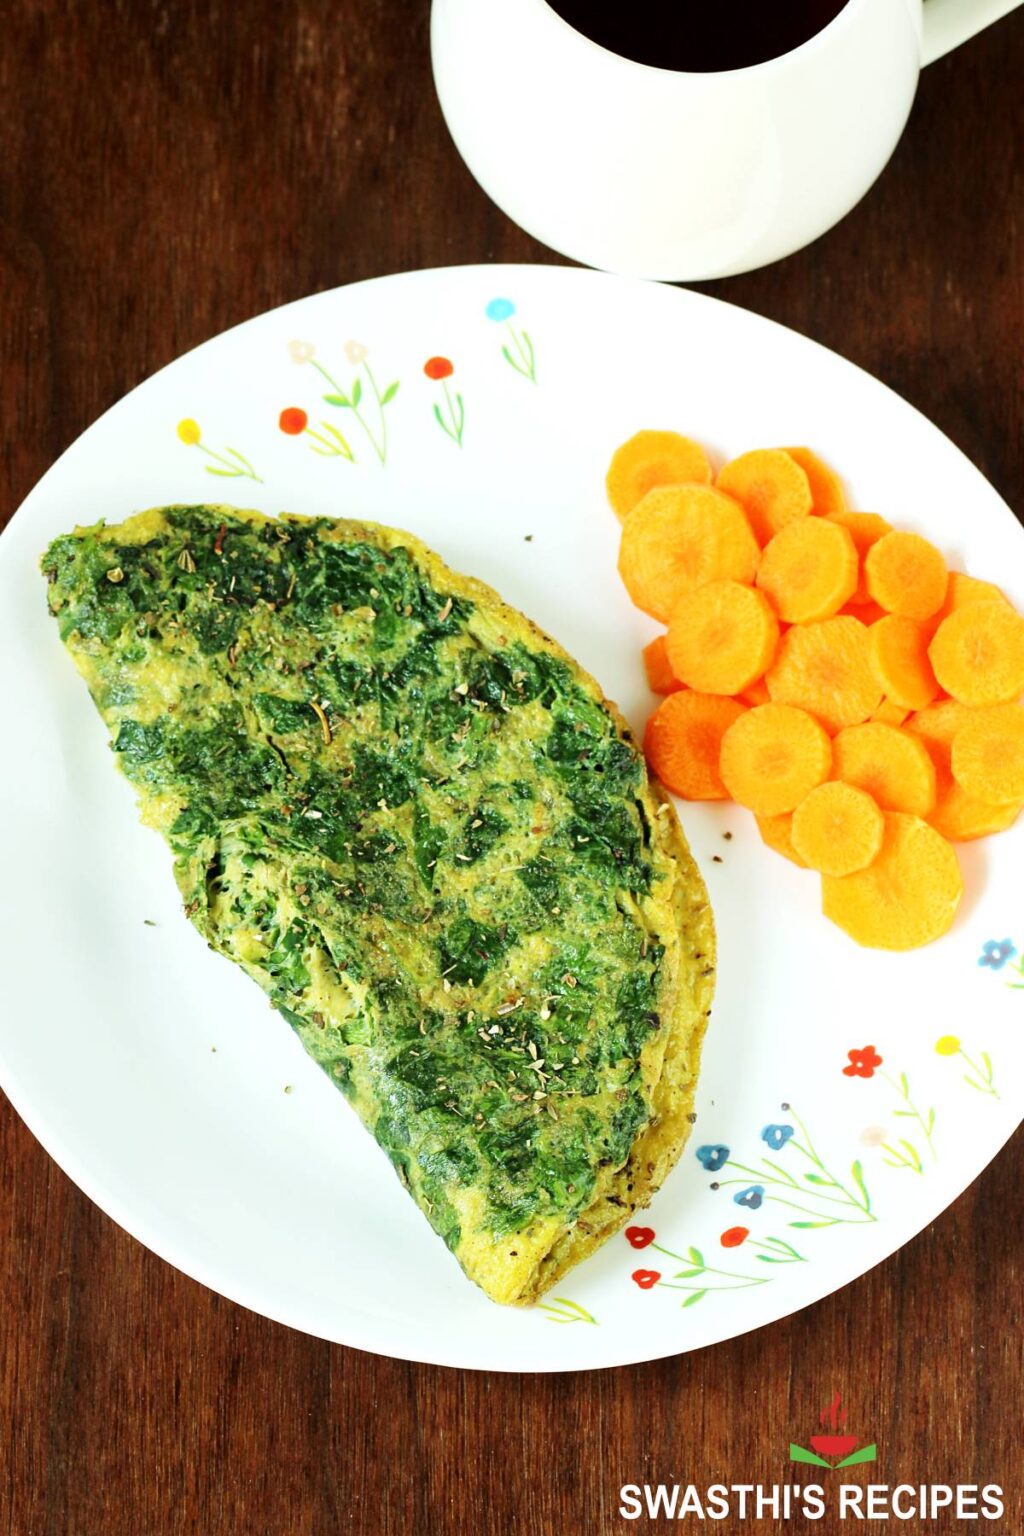 Spinach omelette recipe - Swasthi&amp;#39;s Recipes